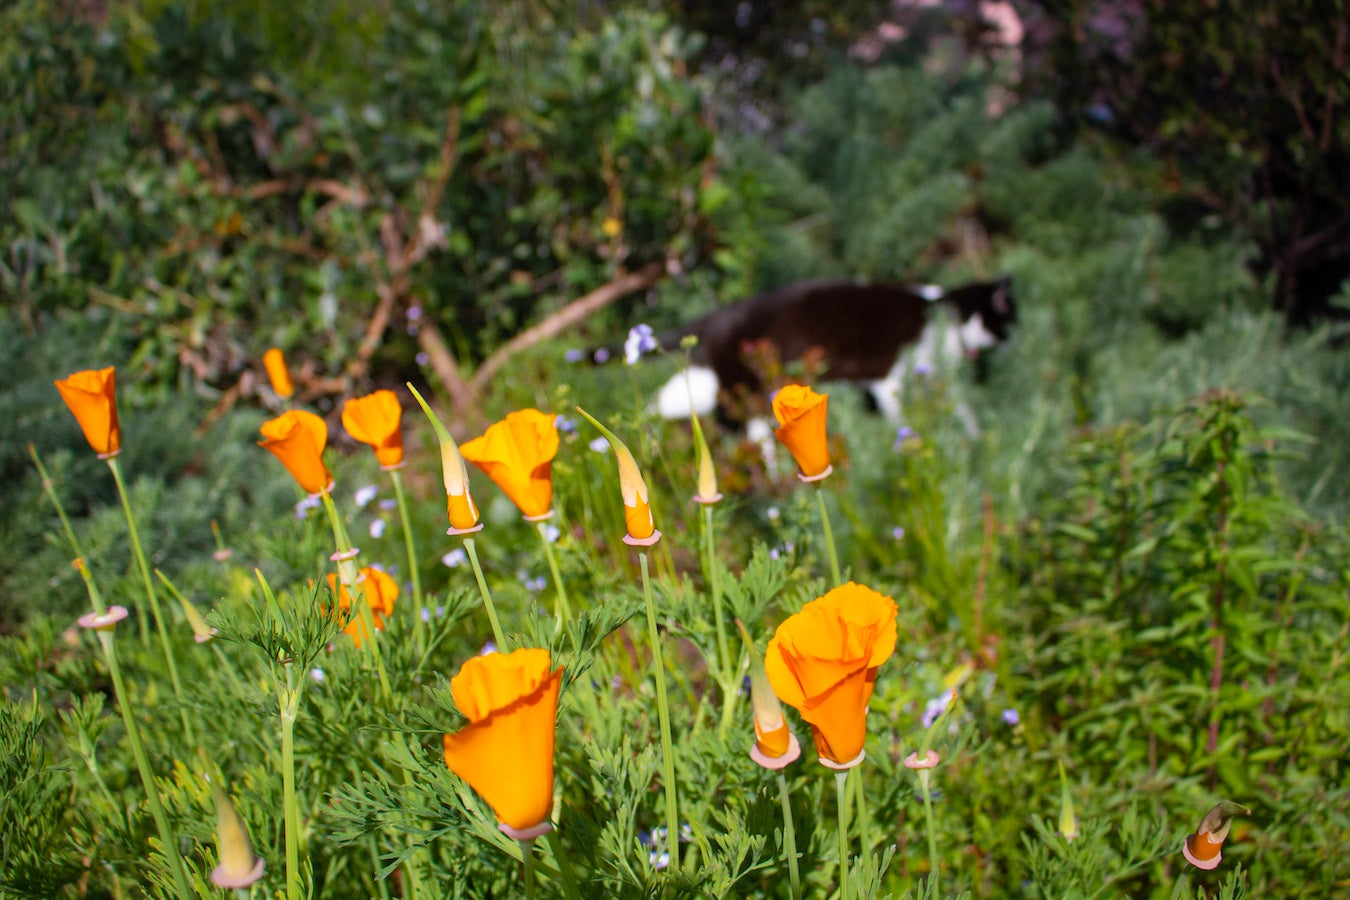 California poppies with cat